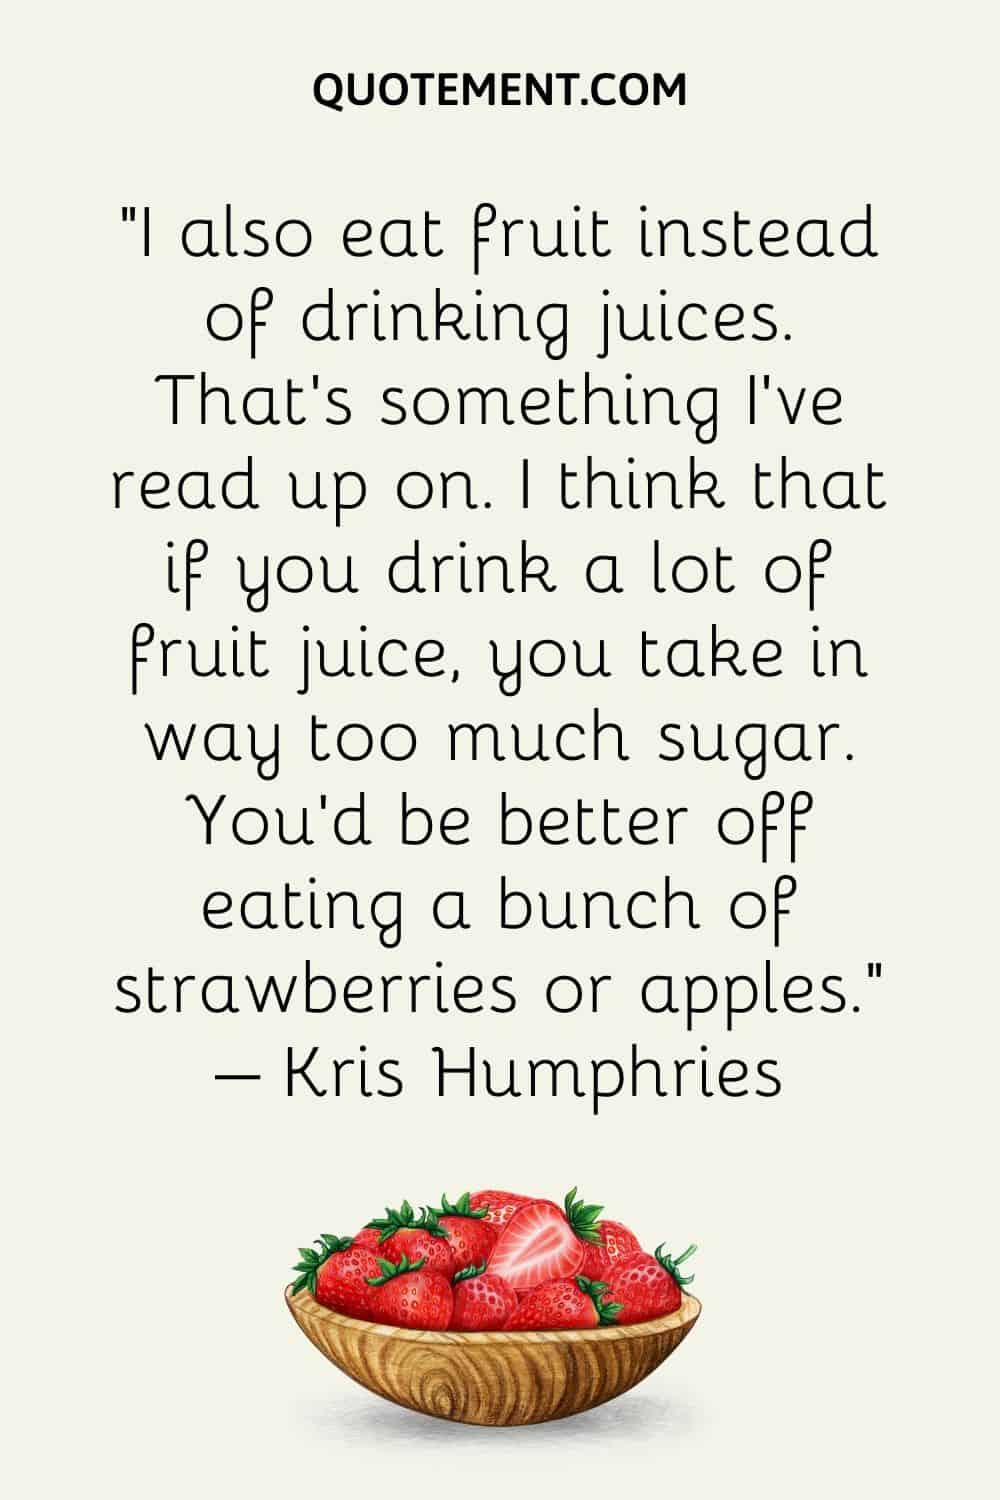 I also eat fruit instead of drinking juices